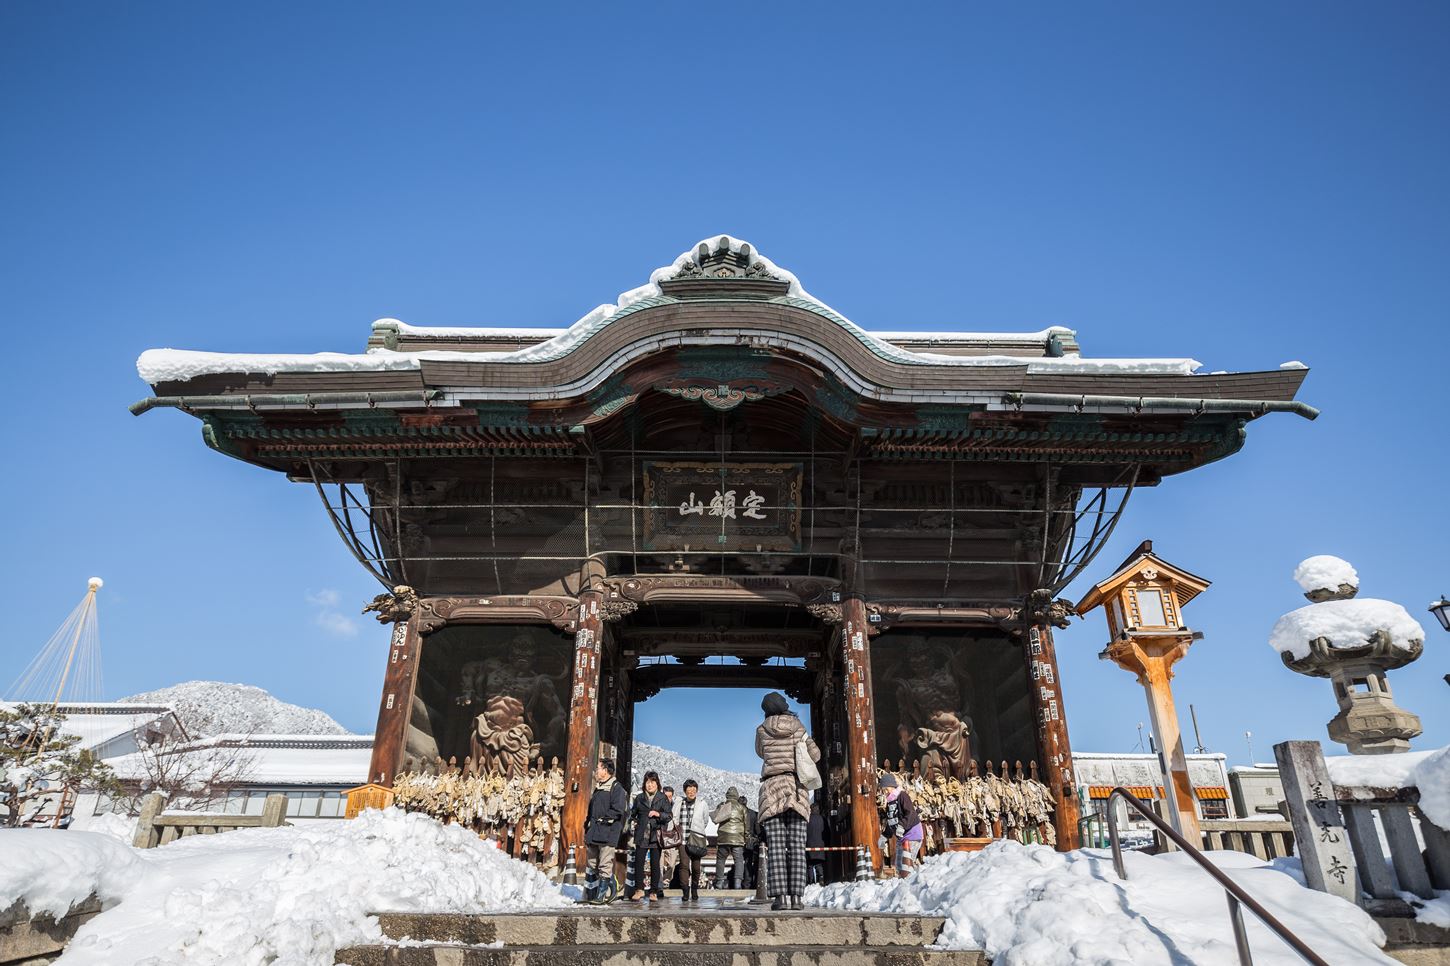 Sightseeing scenery that simply shows the weather in Nagano in January4